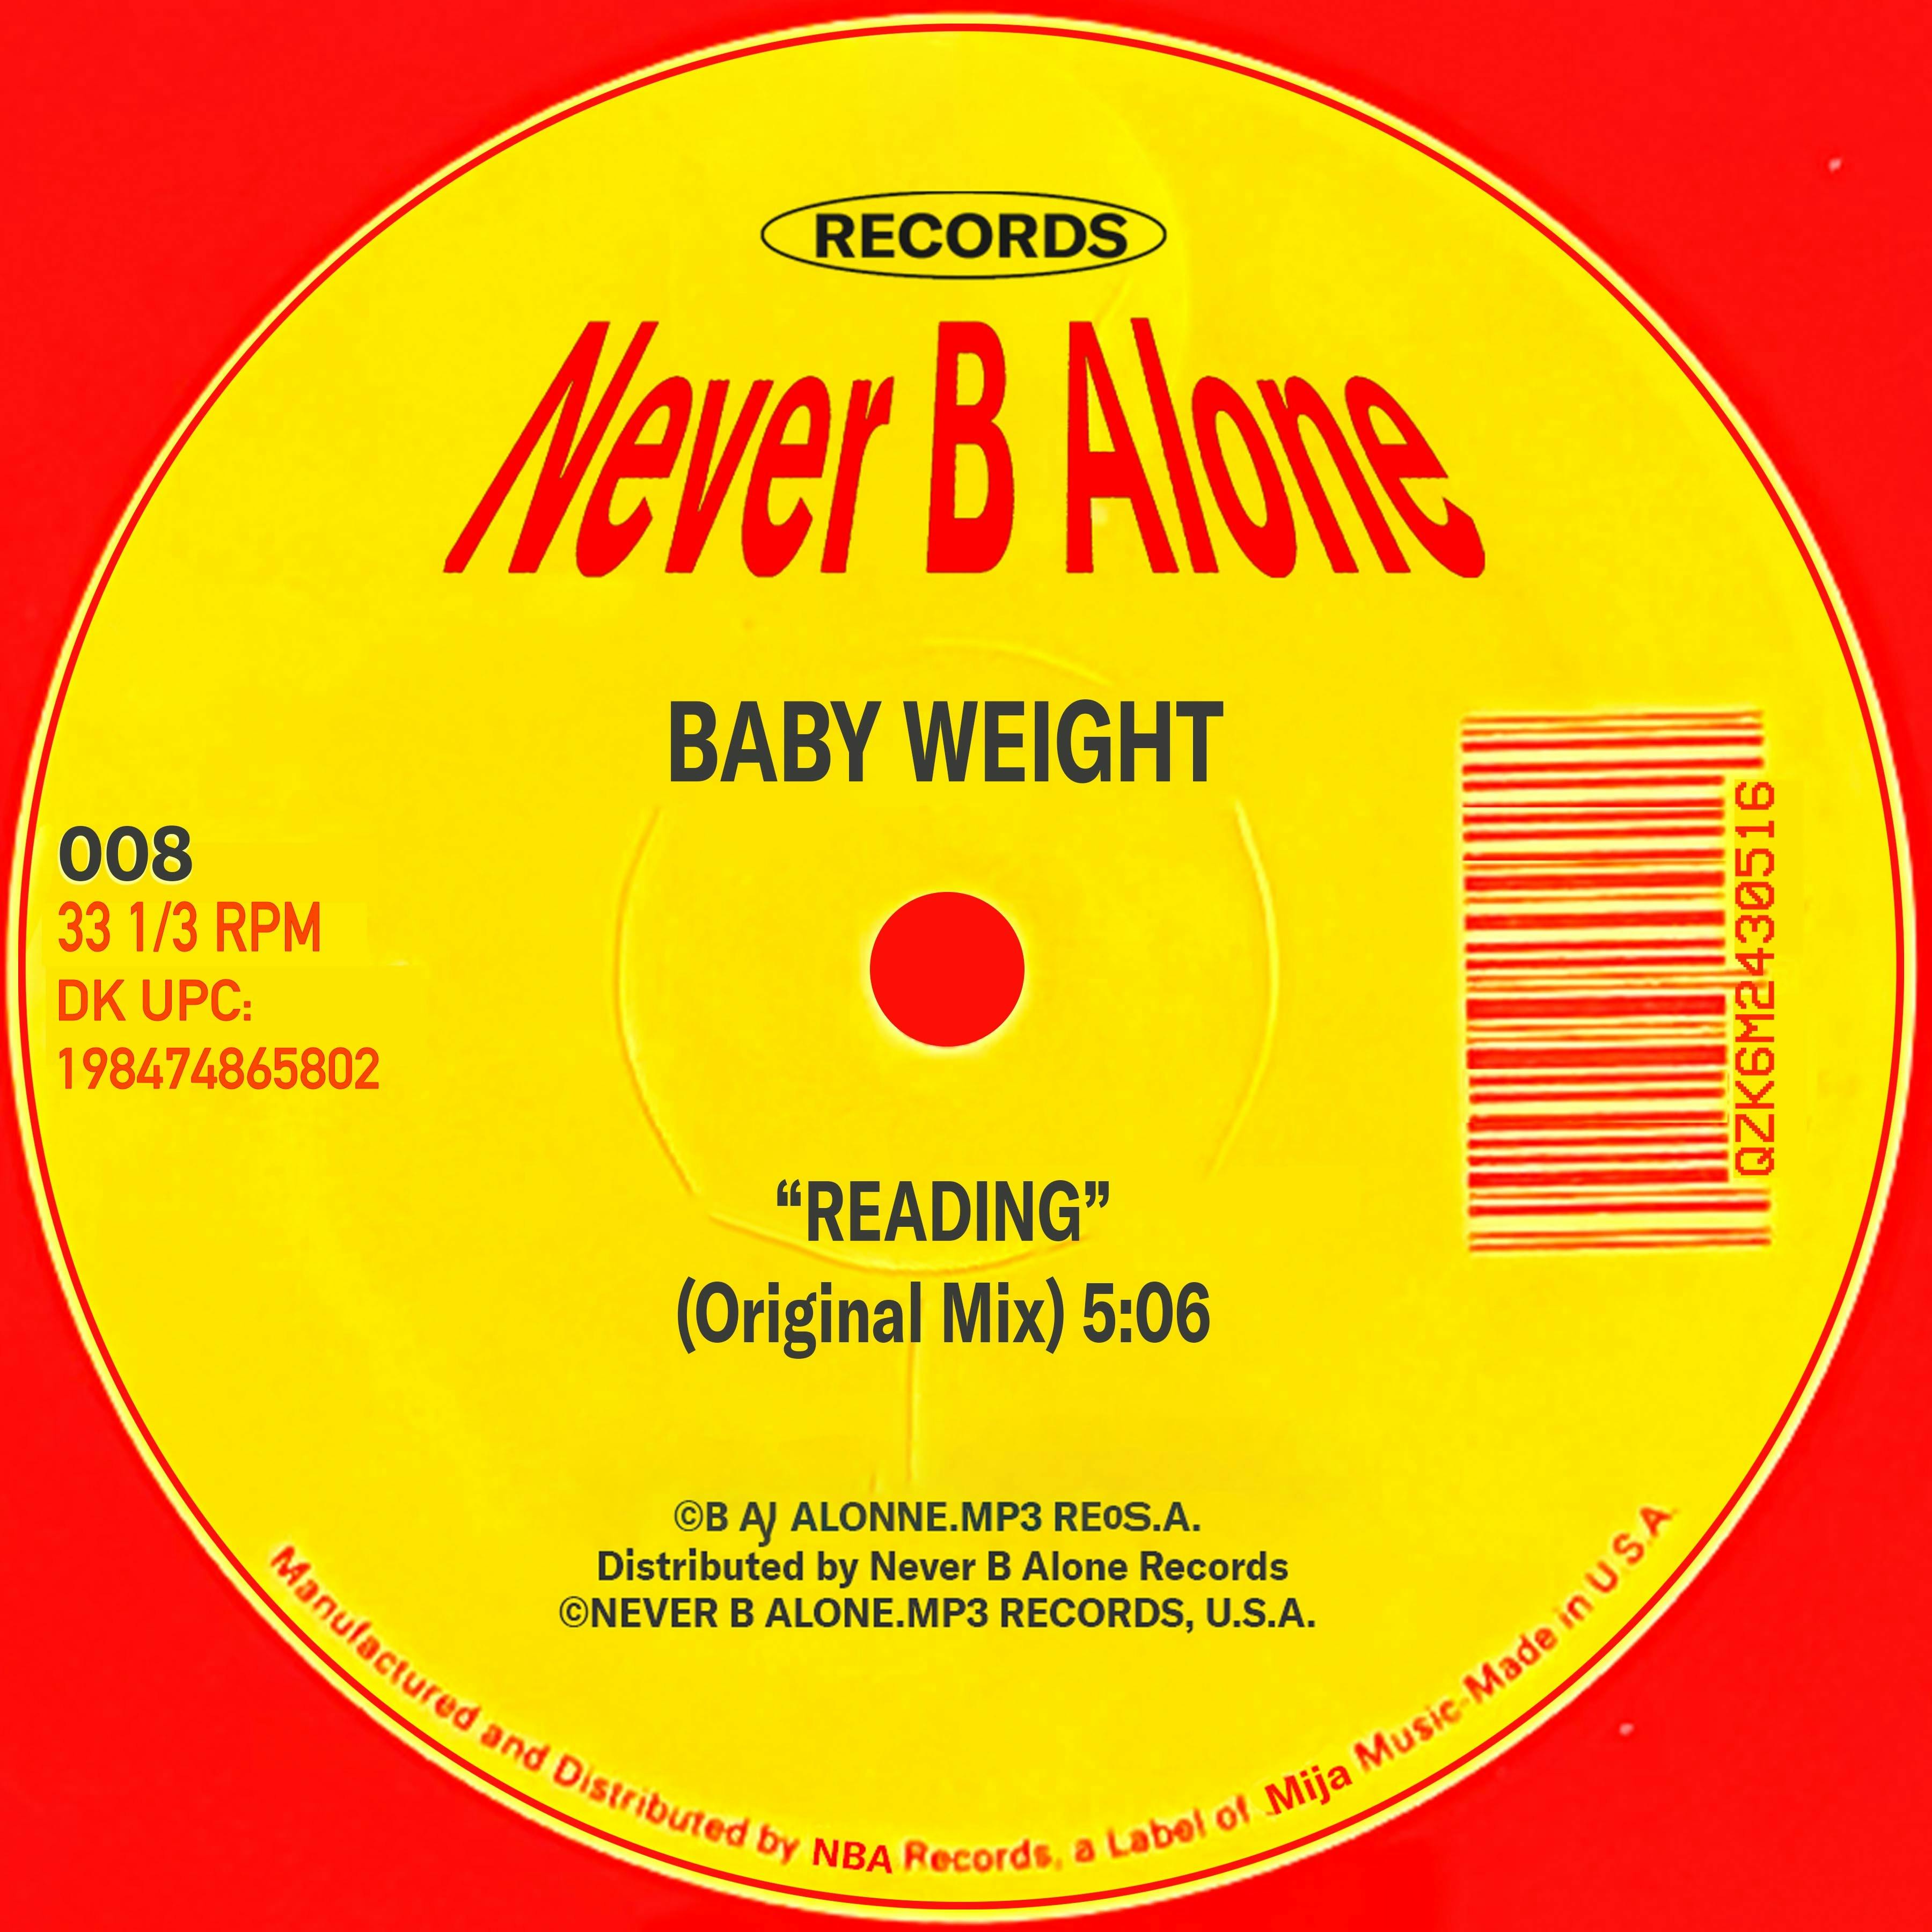 Baby Weight - "Reading"